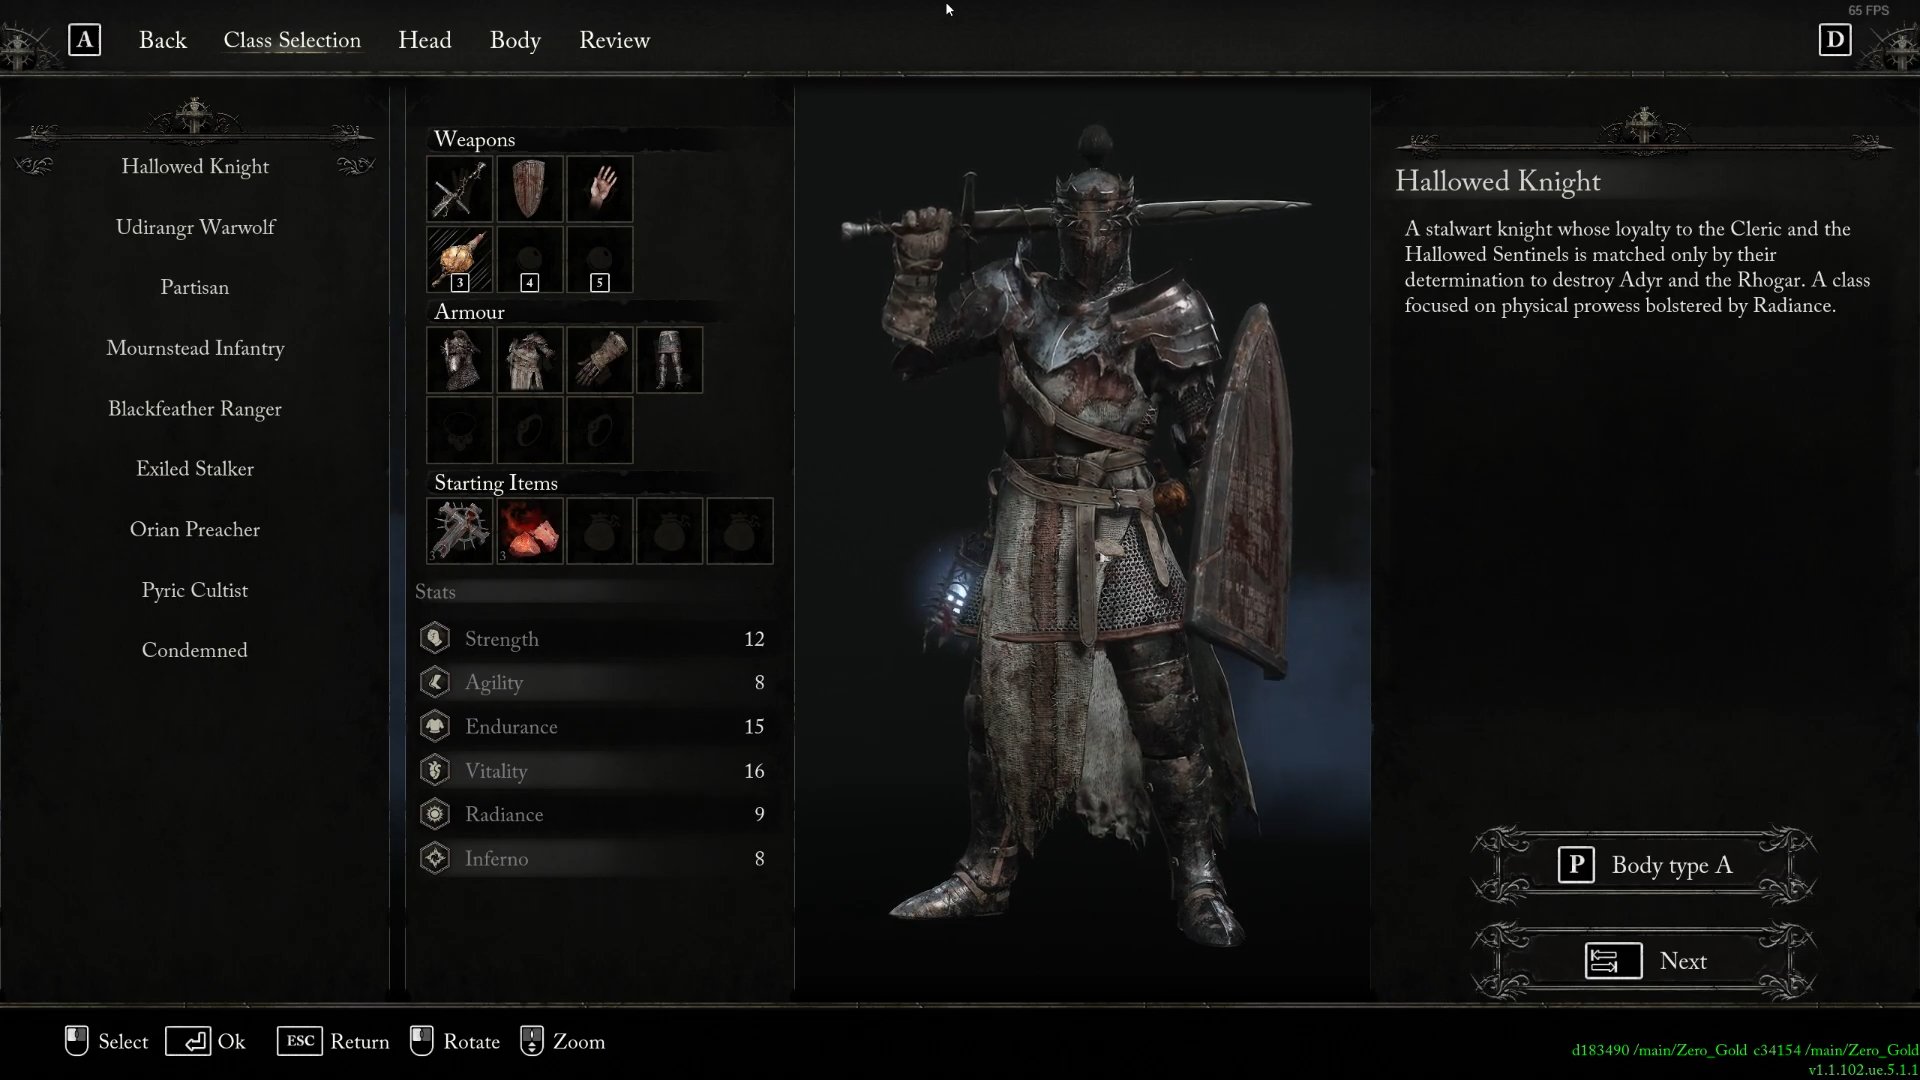 New Lords Of The Fallen Gameplay Info Highlights Tutorial, Character  Creation, And More